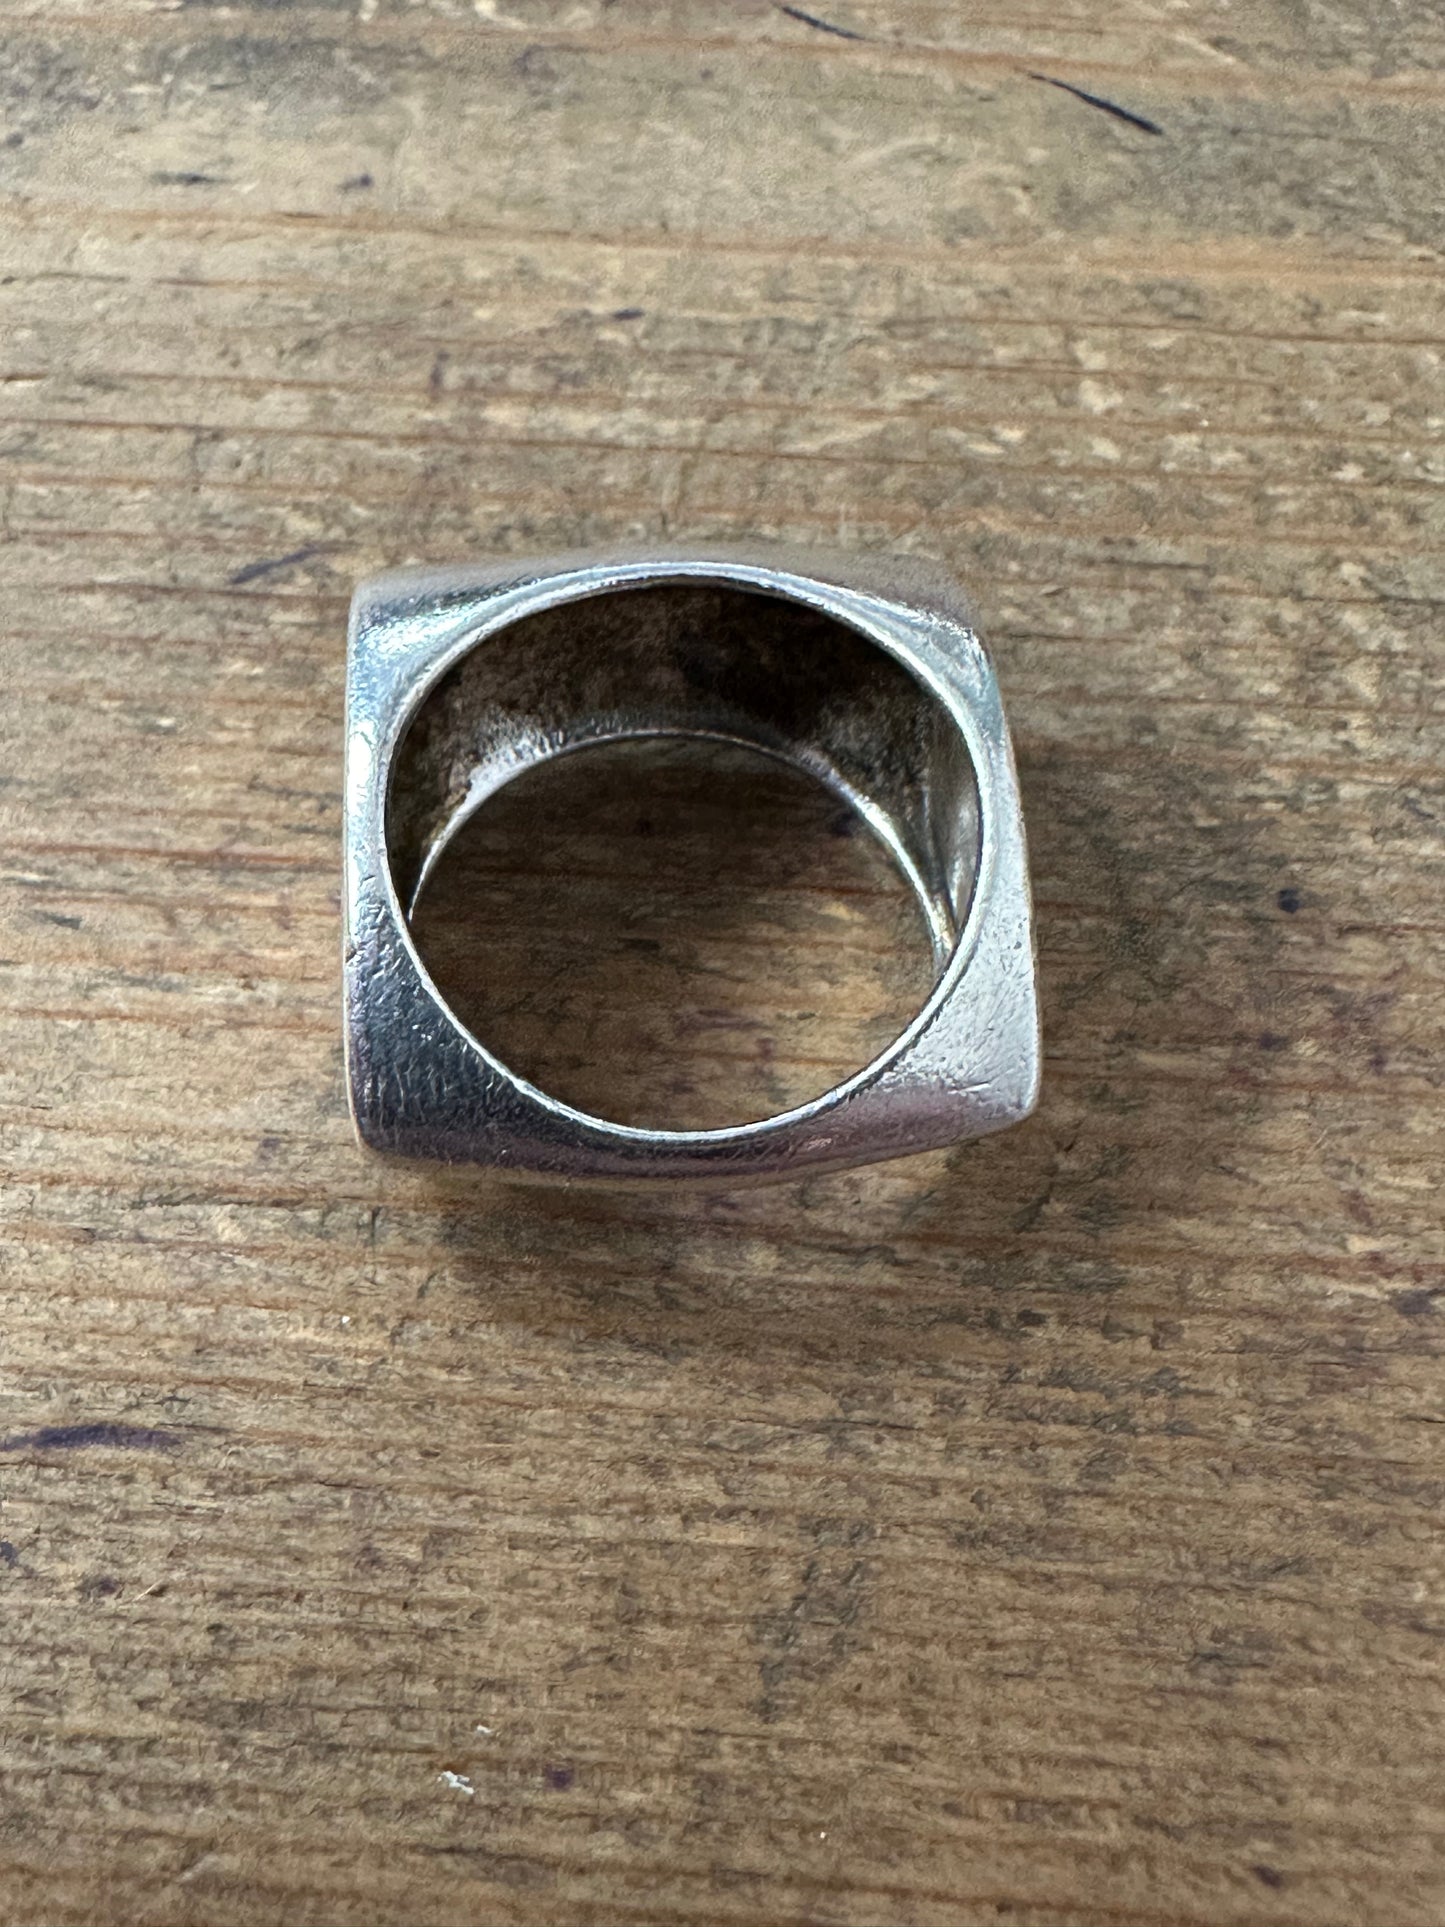 Abstract Square 925 Silver Size O1/2 Ring